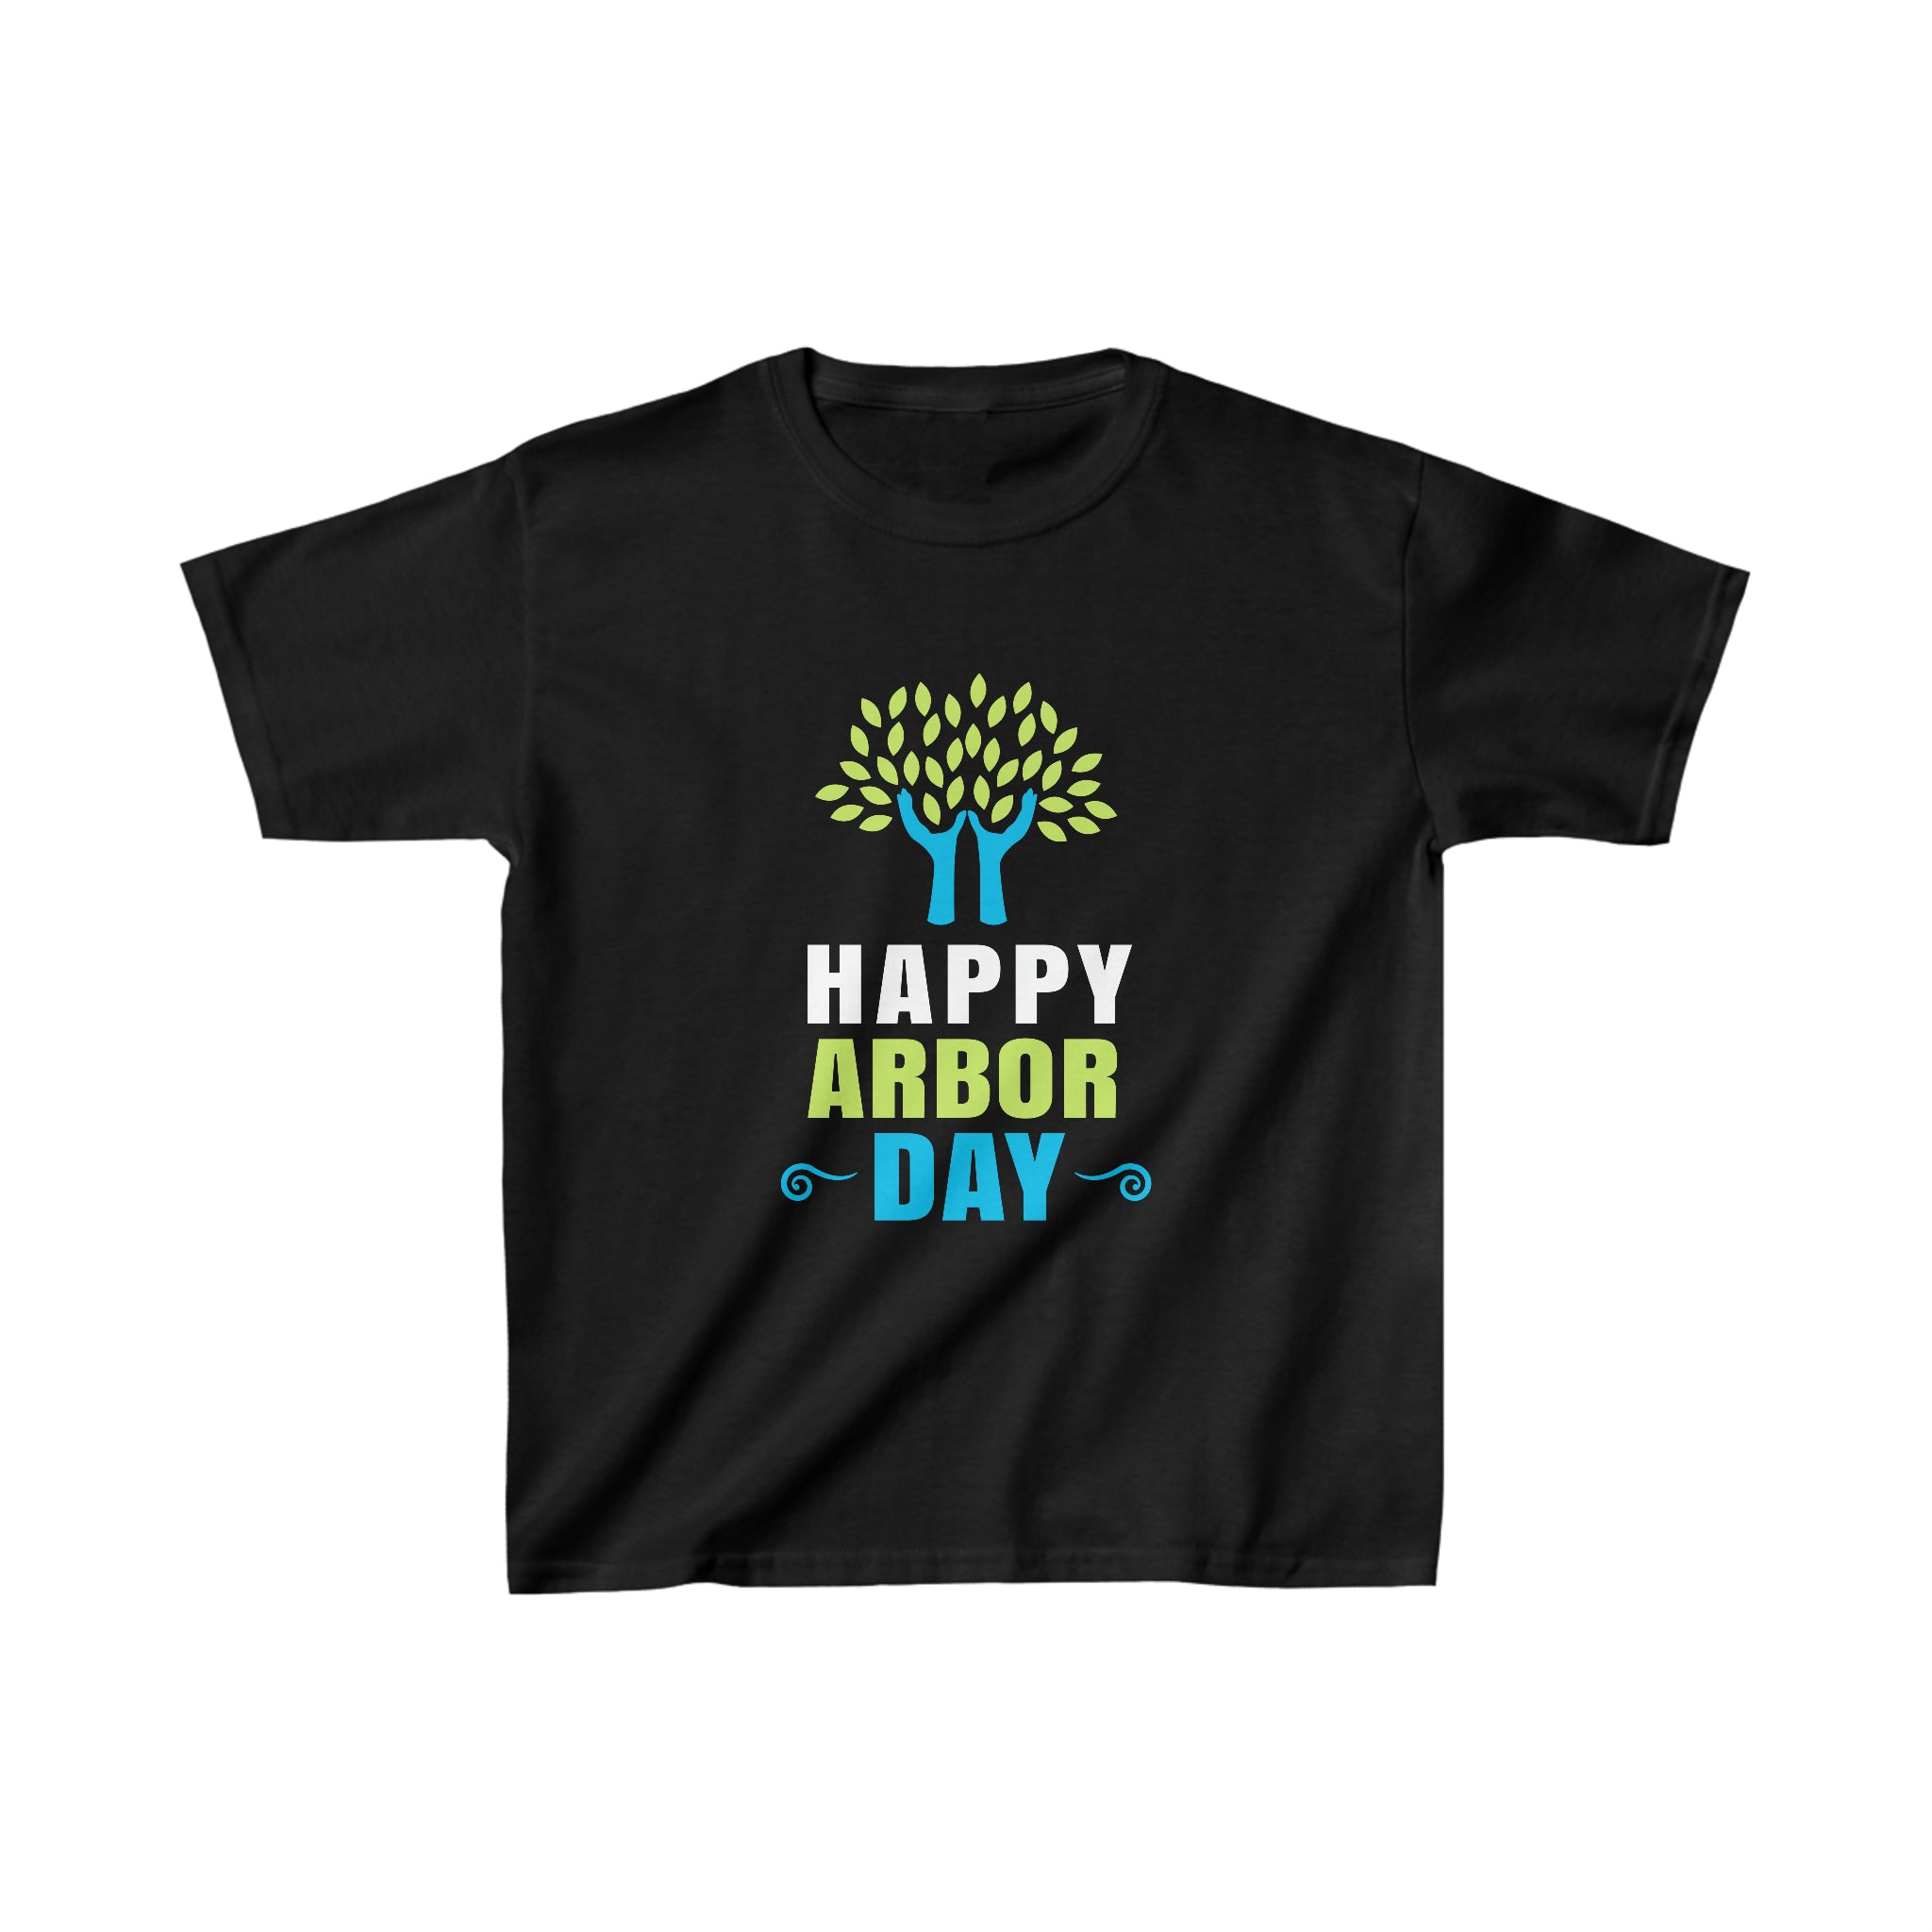 Happy Arbor Day Shirts Earth Day Shirts Save the Planet Girls T Shirts